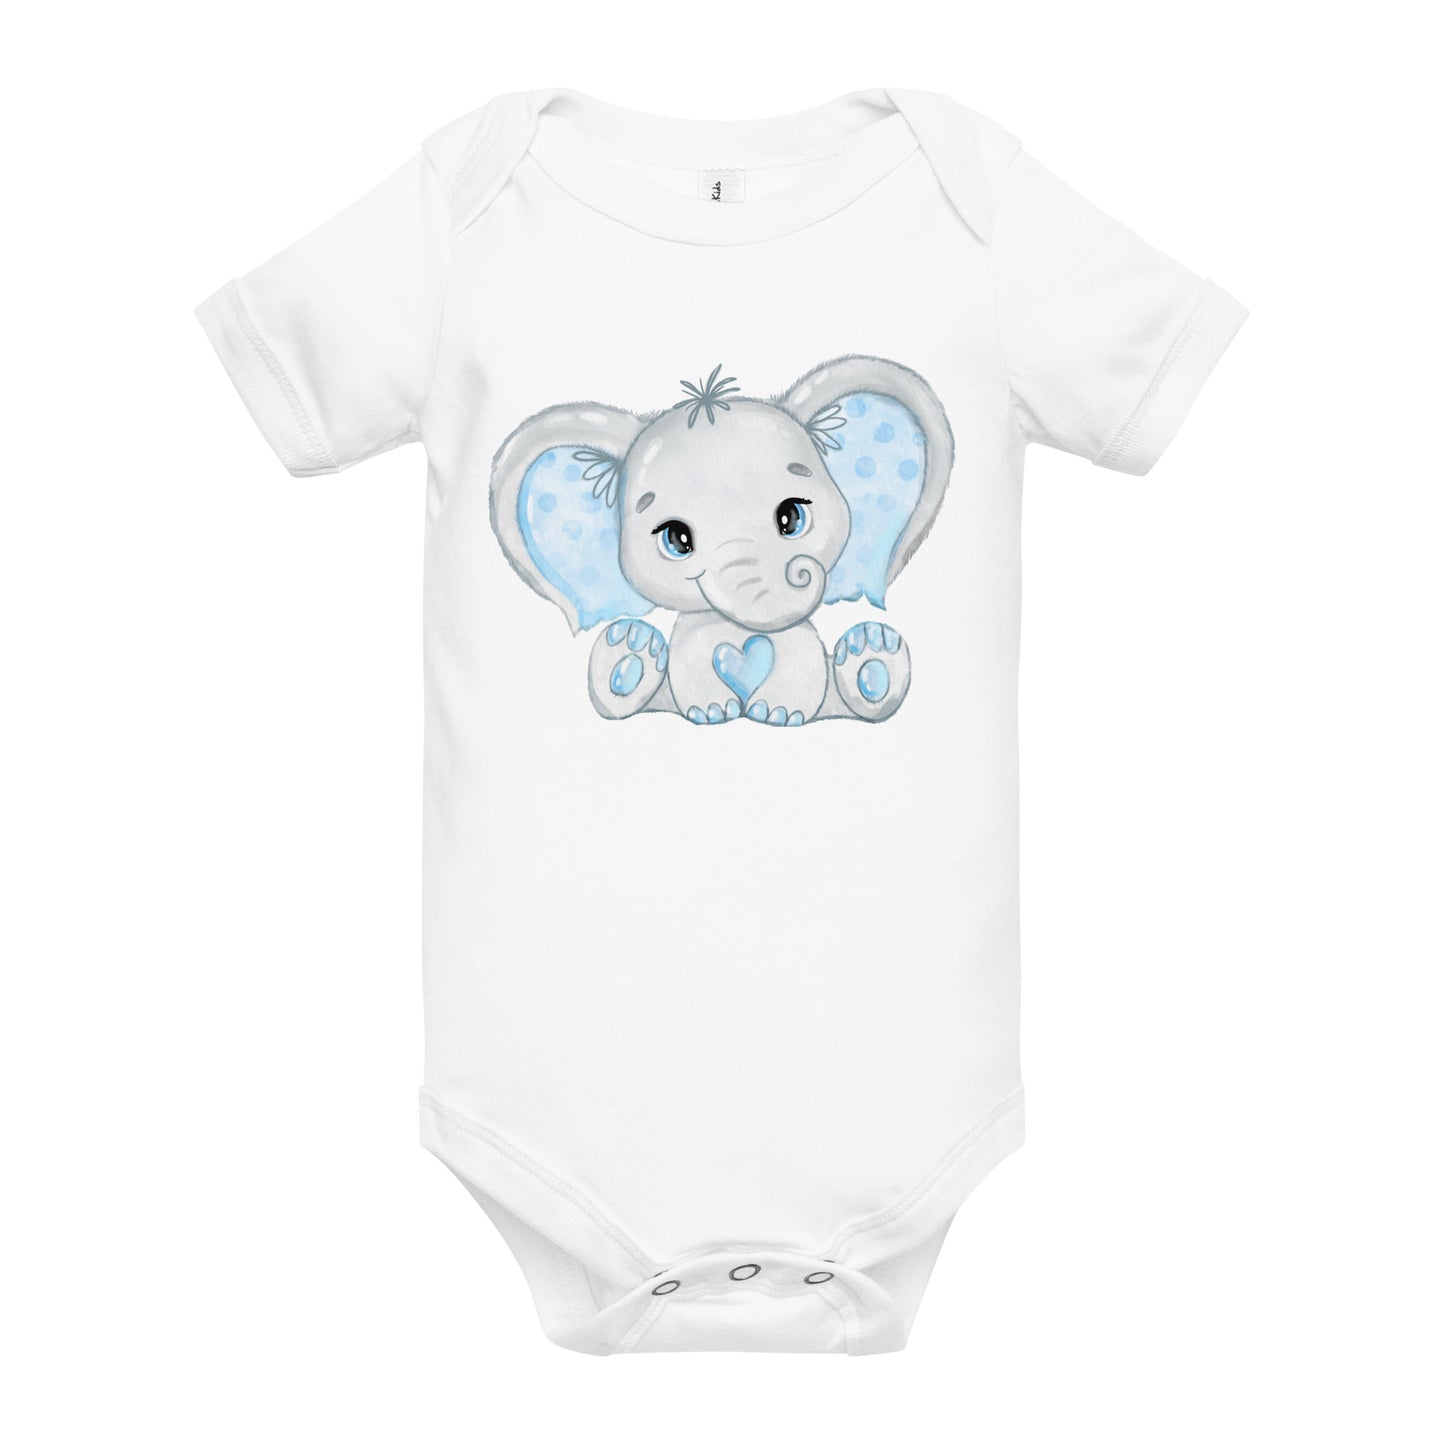 Limited Edition Elephant Quality Cotton Bella Canvas Baby Onesie